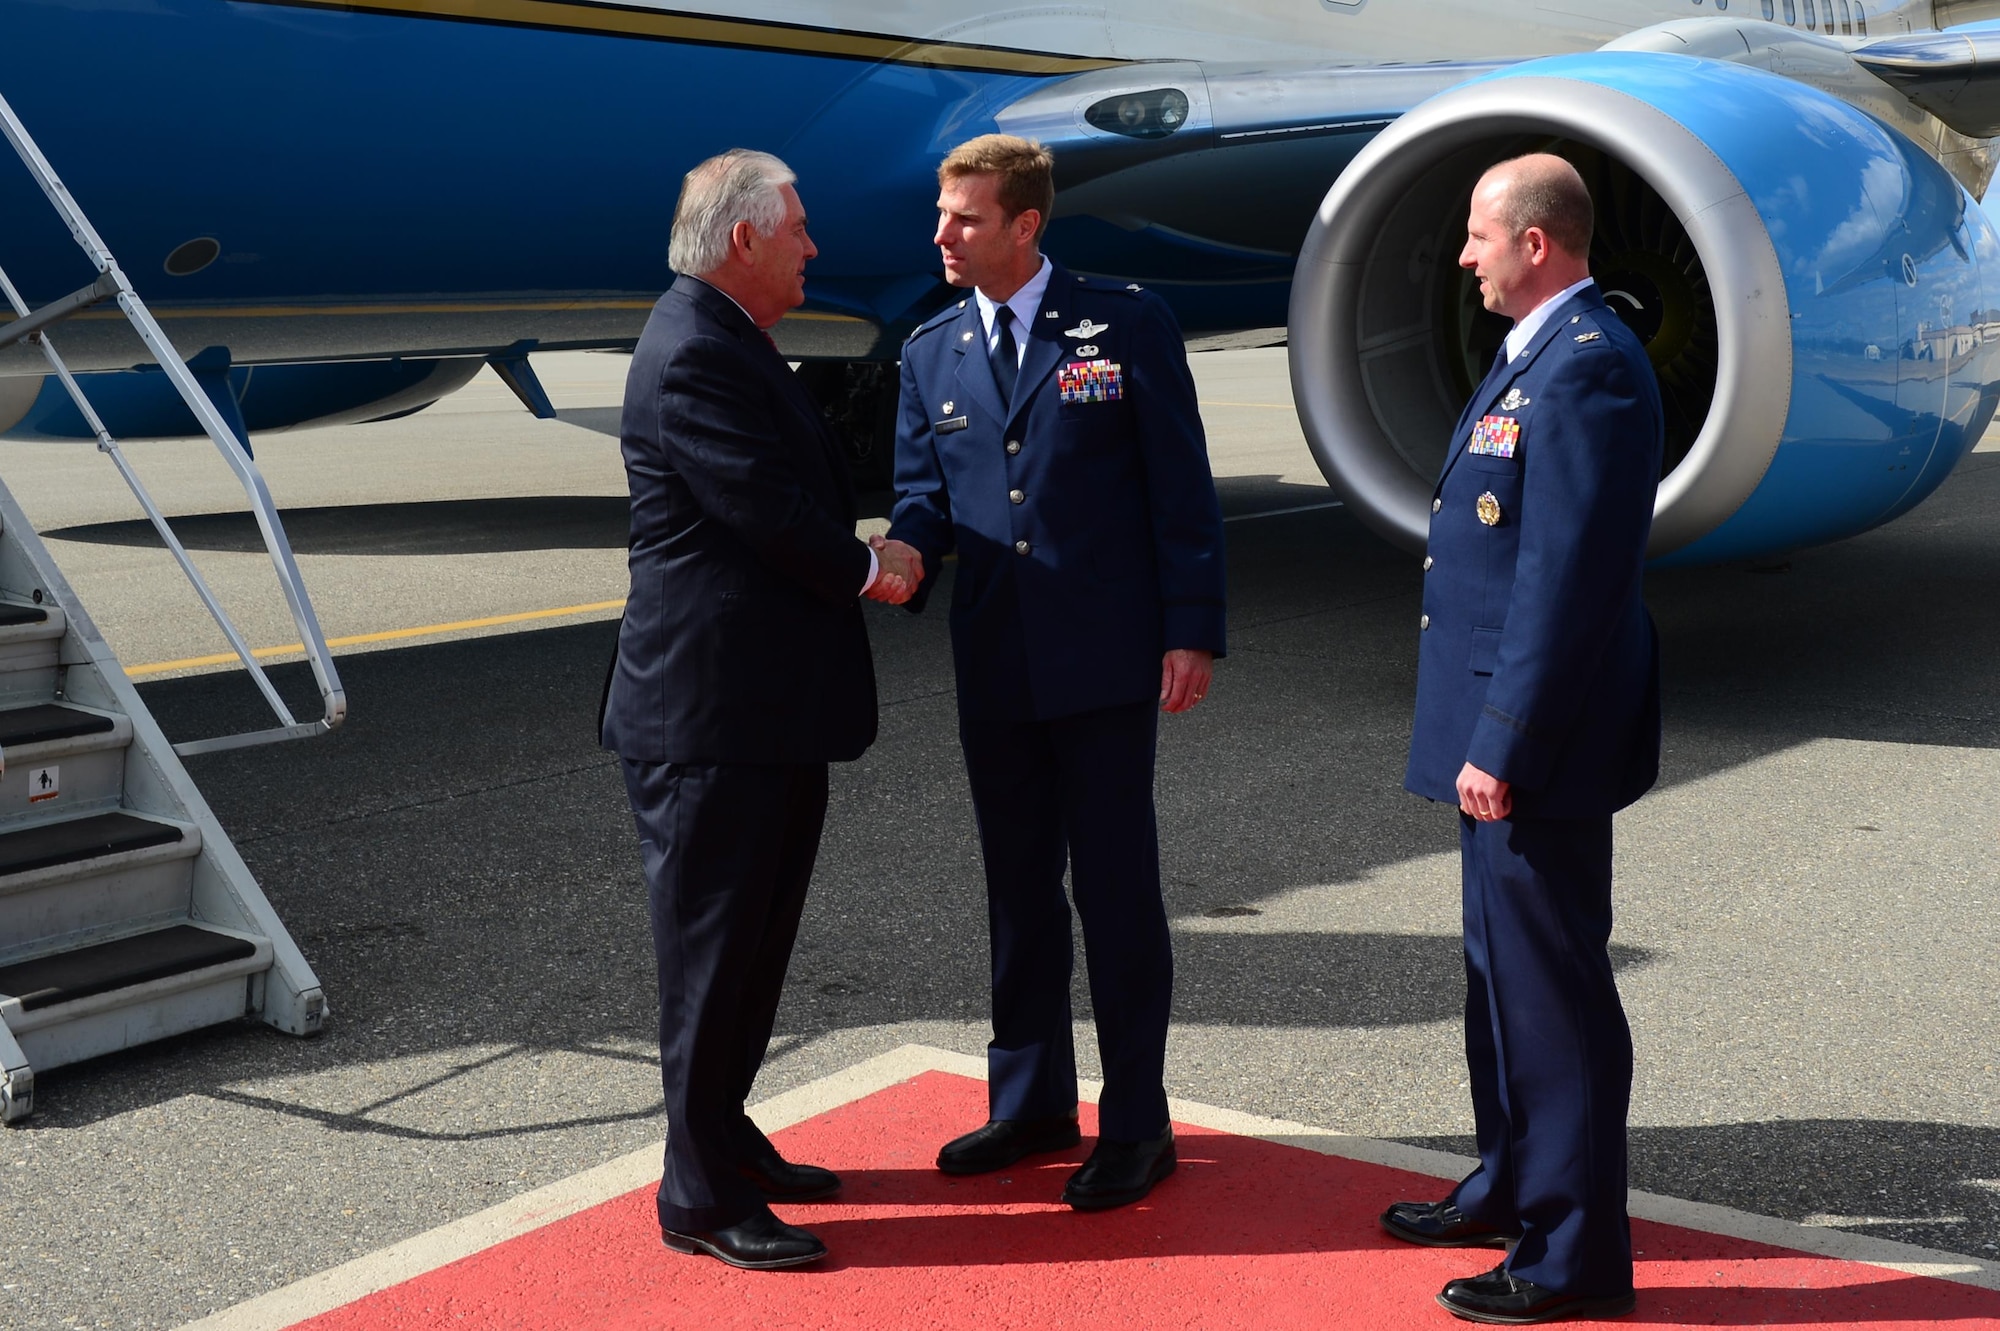 U.S. Air Force Col. David Mineau, the 354th Fighter Wing commander, shakes U.S. Secretary of State Rex Tillerson’s hand May 10, 2017, at Eielson Air Force Base, Alaska. Tillerson landed at Eielson on his way to the 10th Annual Arctic Council Ministerial, the leading intergovernmental forum promoting cooperation, coordination and interaction among the Arctic States, Arctic indigenous communities and other Arctic inhabitants on common Arctic issues. (U.S. Air Force photo by Airman Eric M. Fisher)